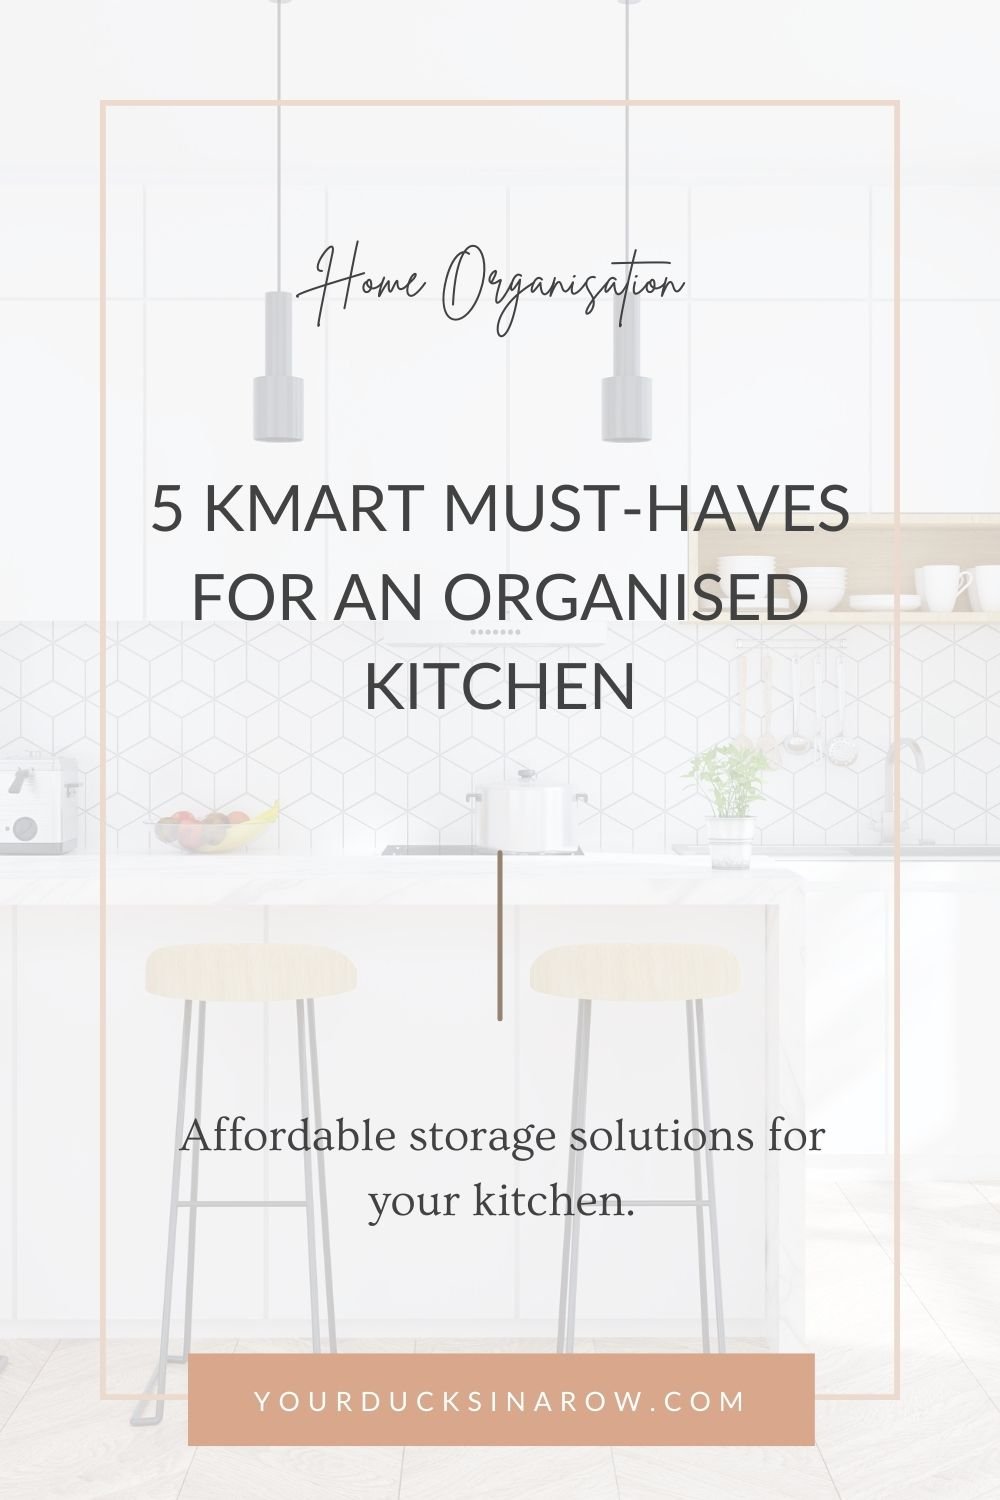 Kmart must-haves for an organised kitchen